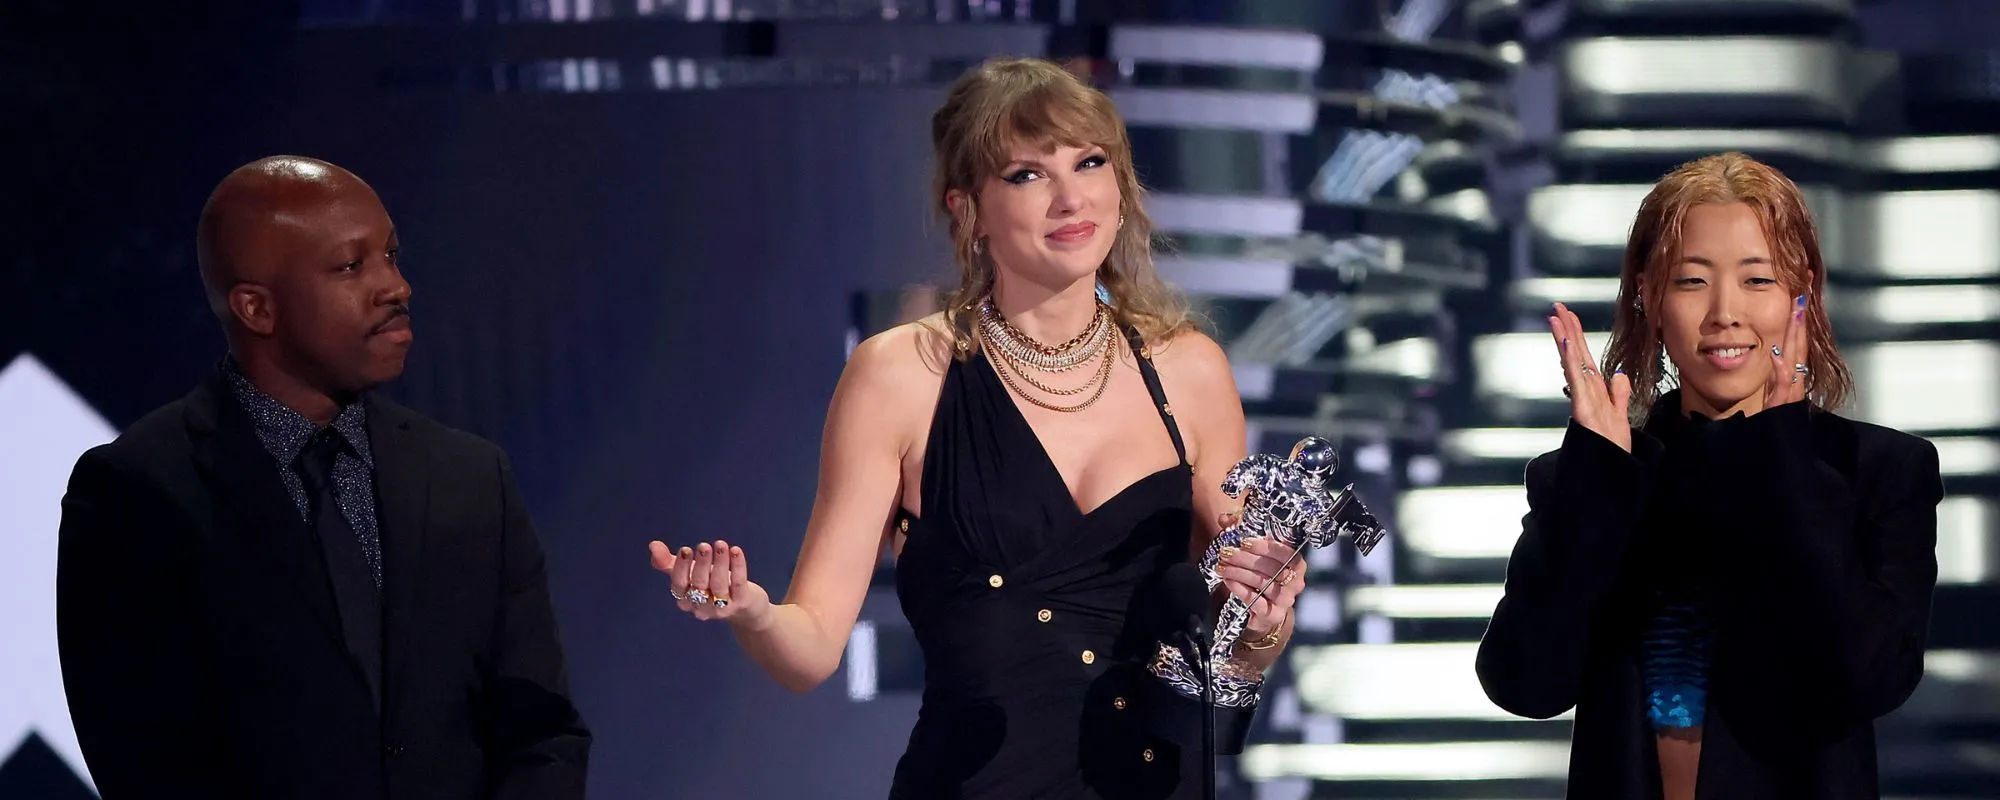 3 Taylor Swift Songs that Will Make Any Listener Tear Up